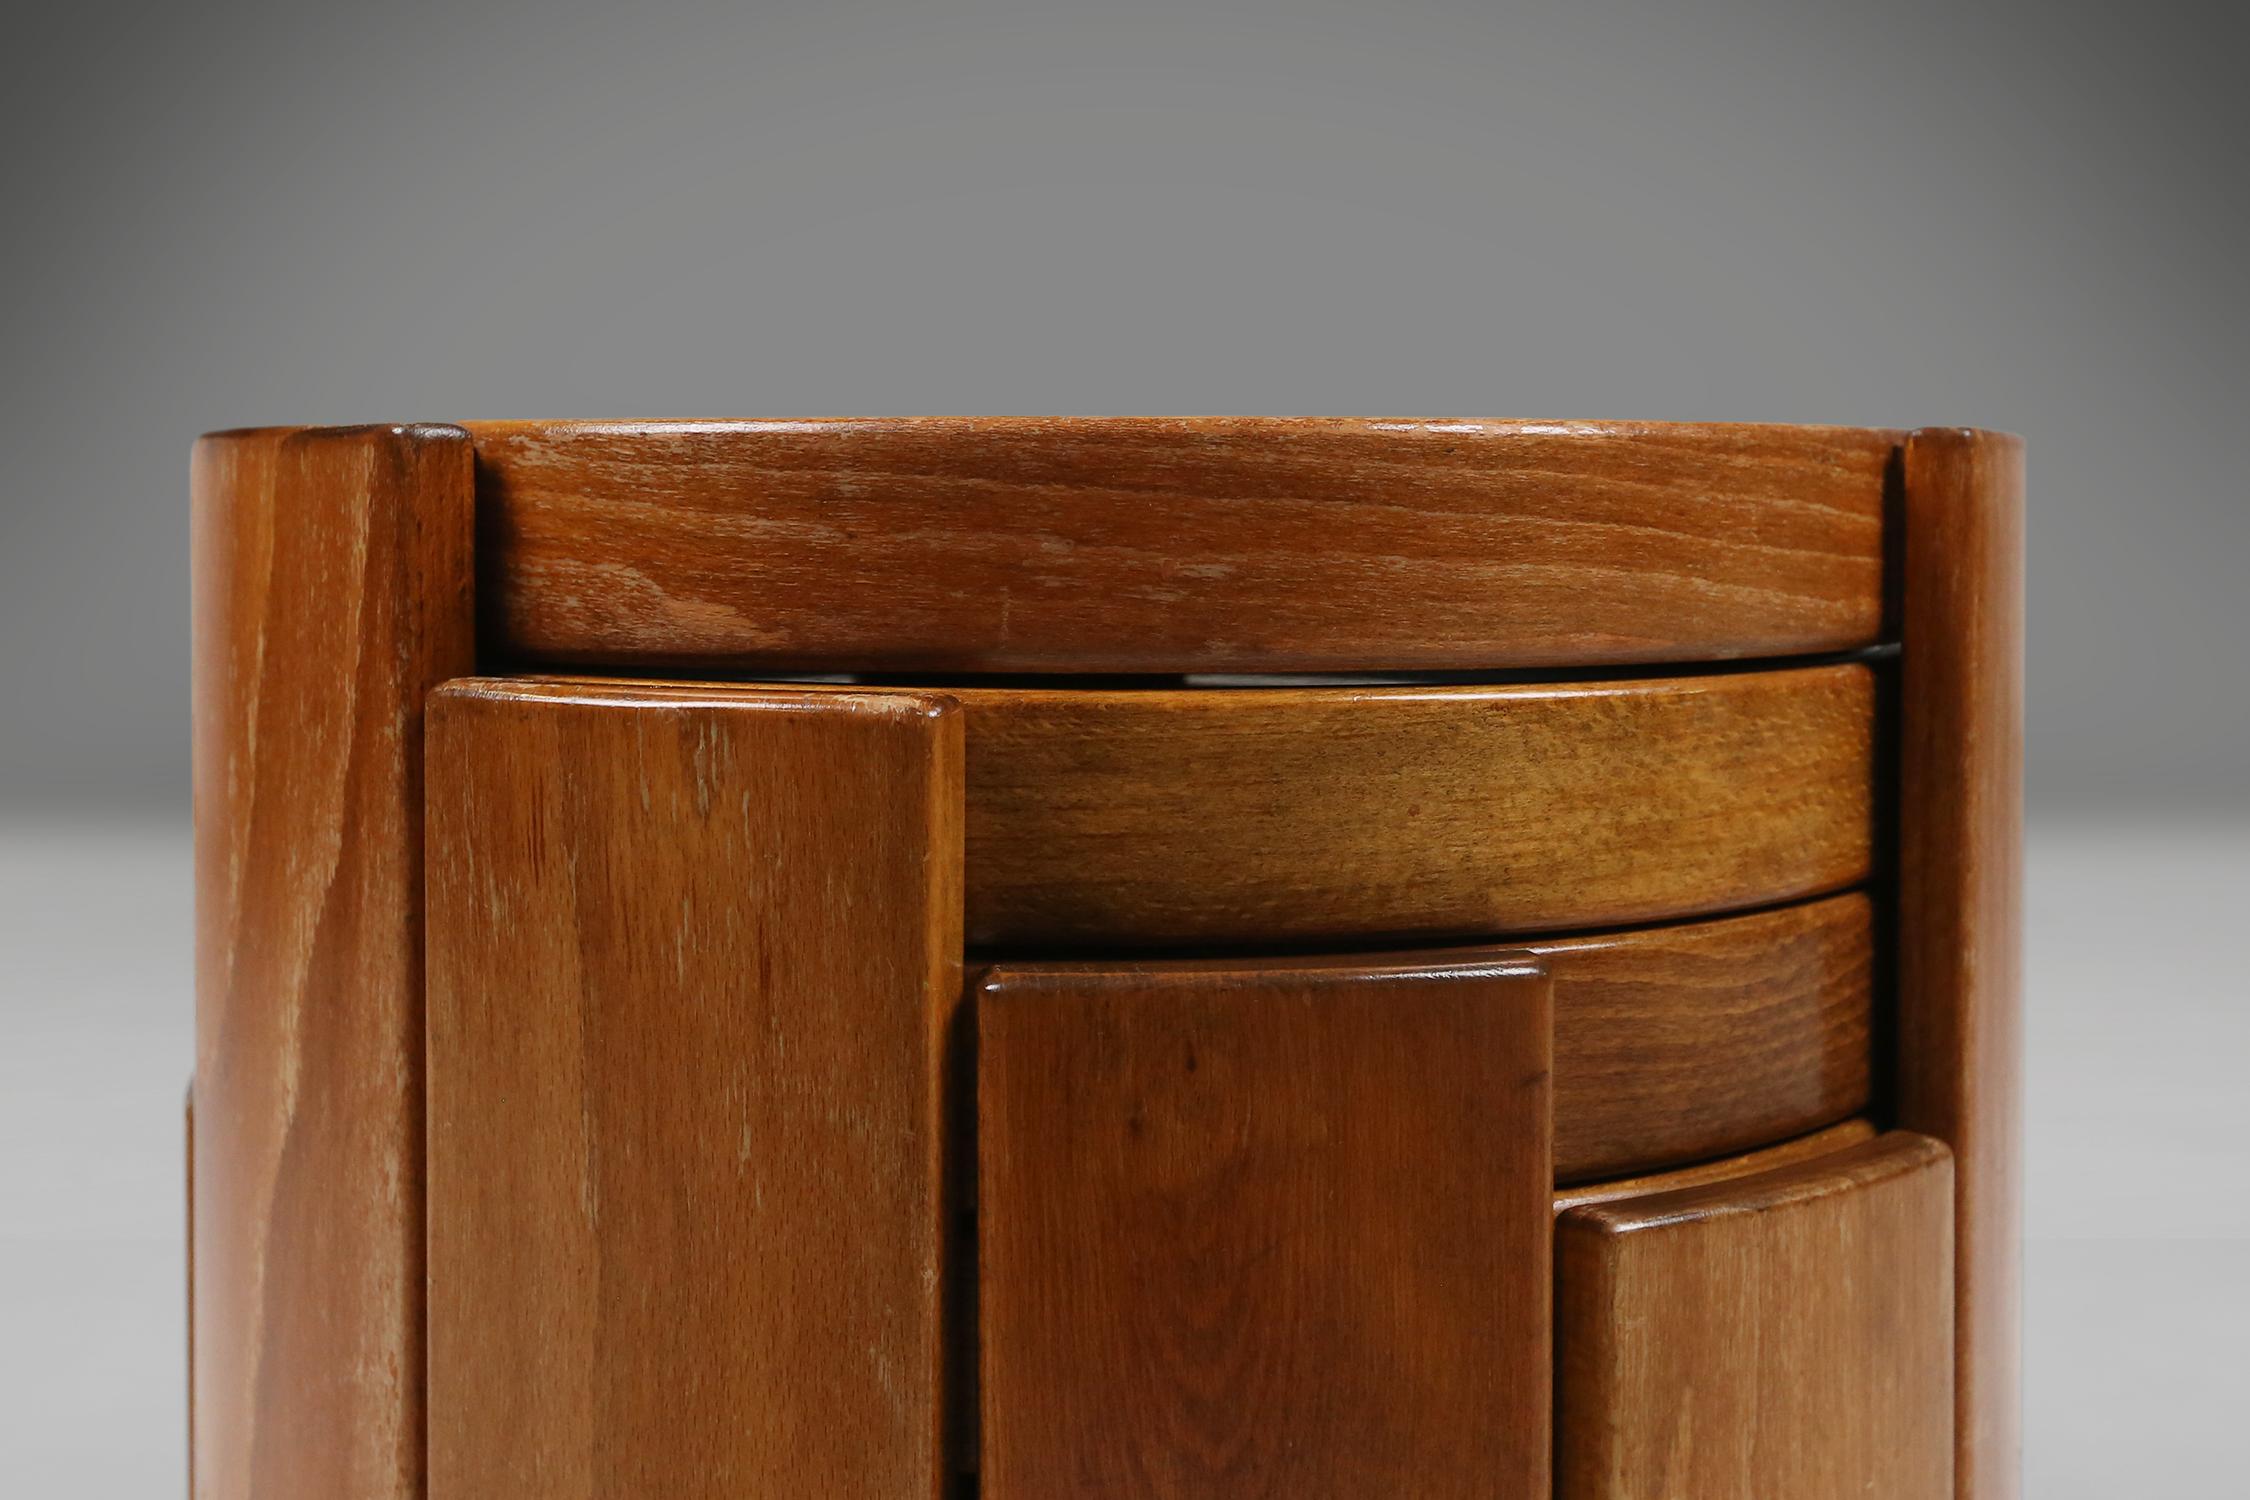 Gianfranco Frattini for Casina, Italy, 1966, early edition wooden nesting tables For Sale 4